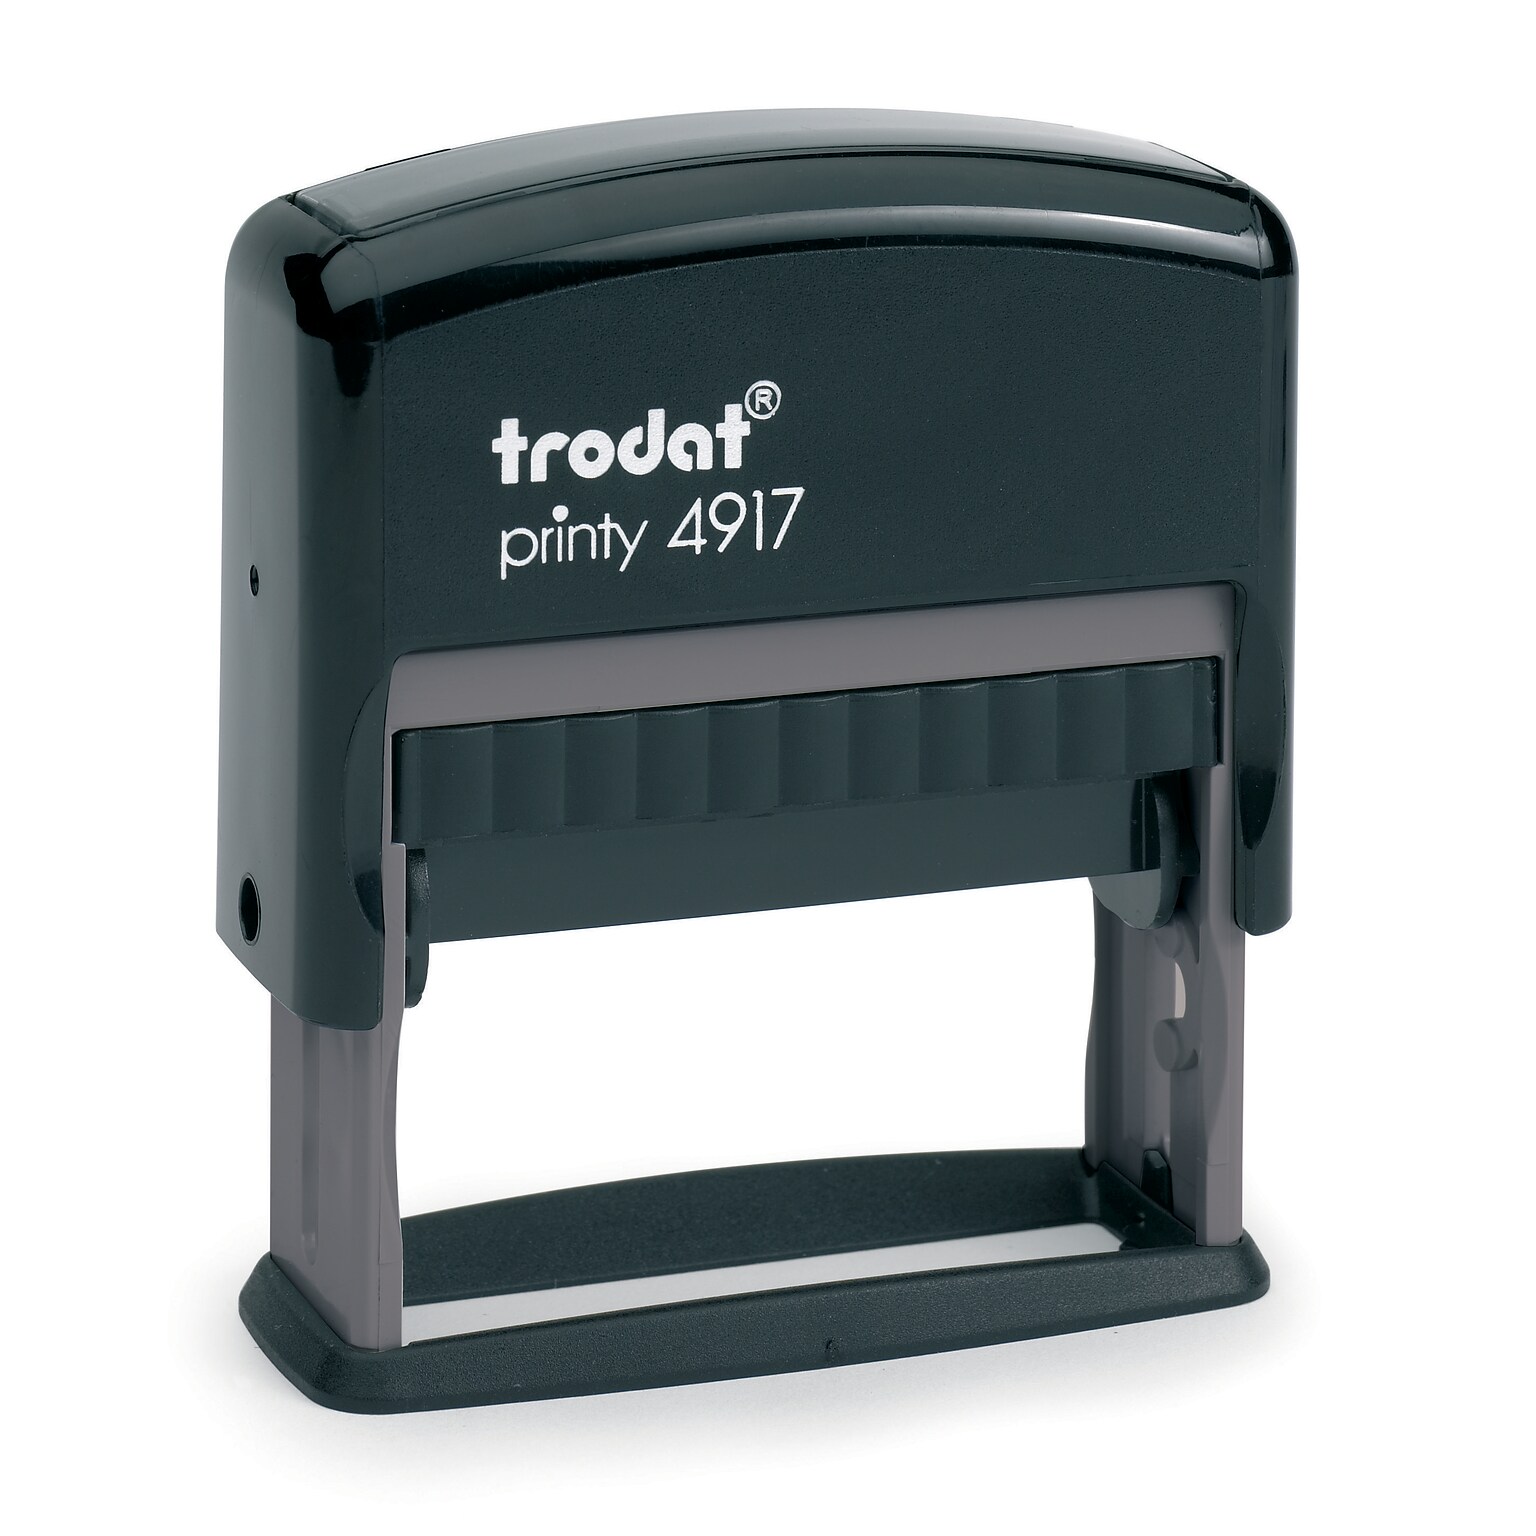 Trodat Printy 4817 Economy 12-Message and Date Stamp, Self-Inking, 0.38 x 2, Black ink